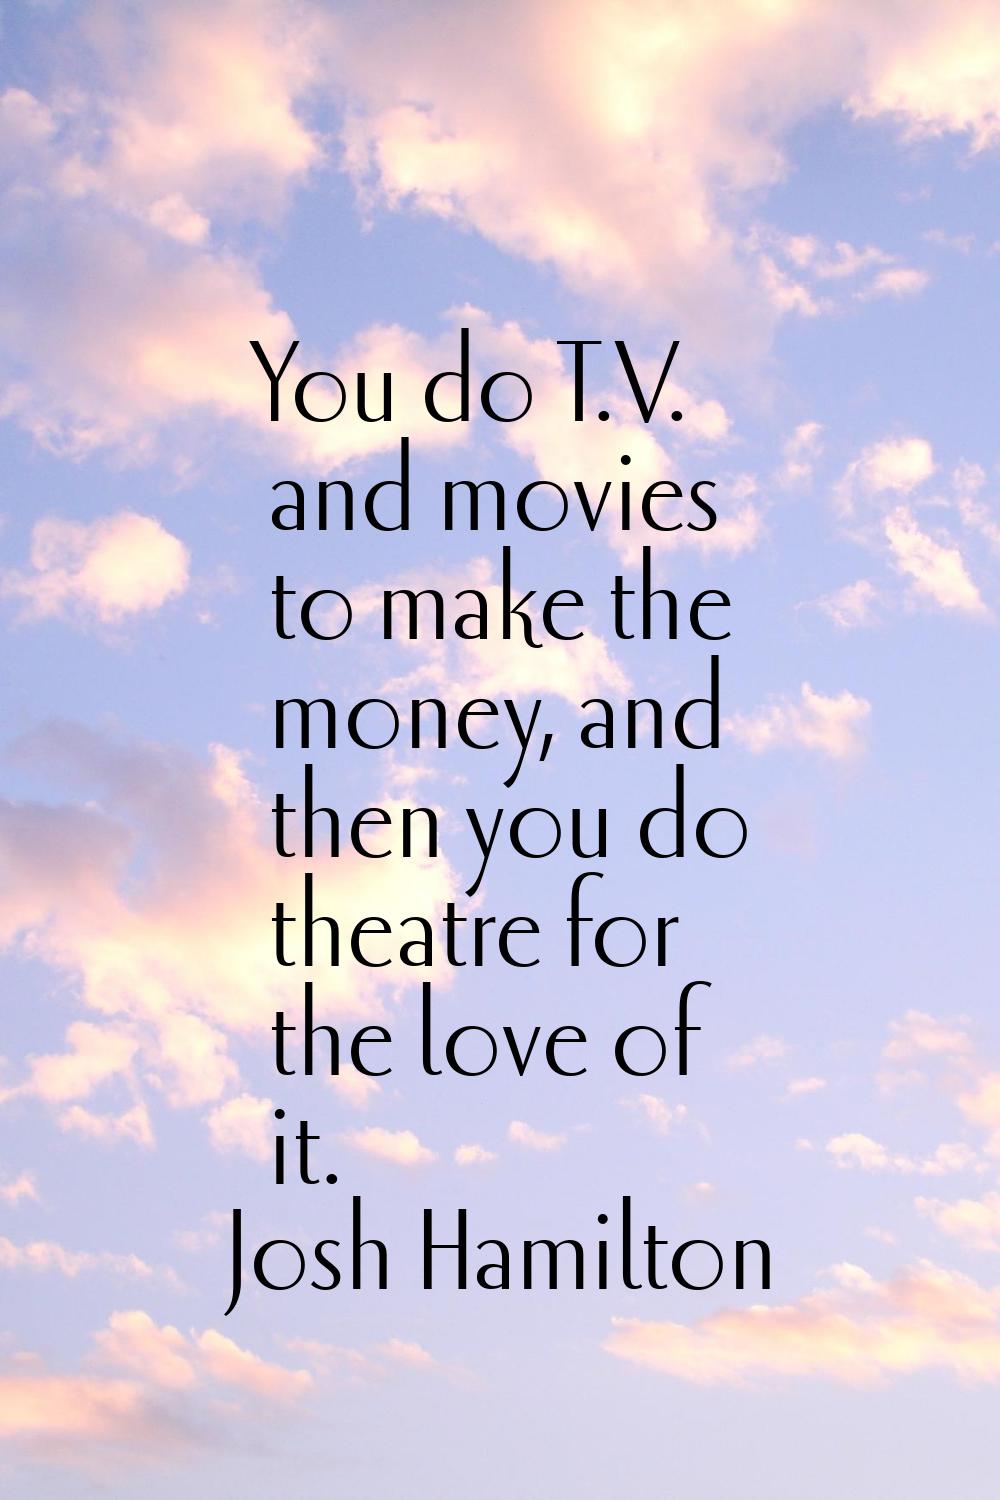 You do T.V. and movies to make the money, and then you do theatre for the love of it.